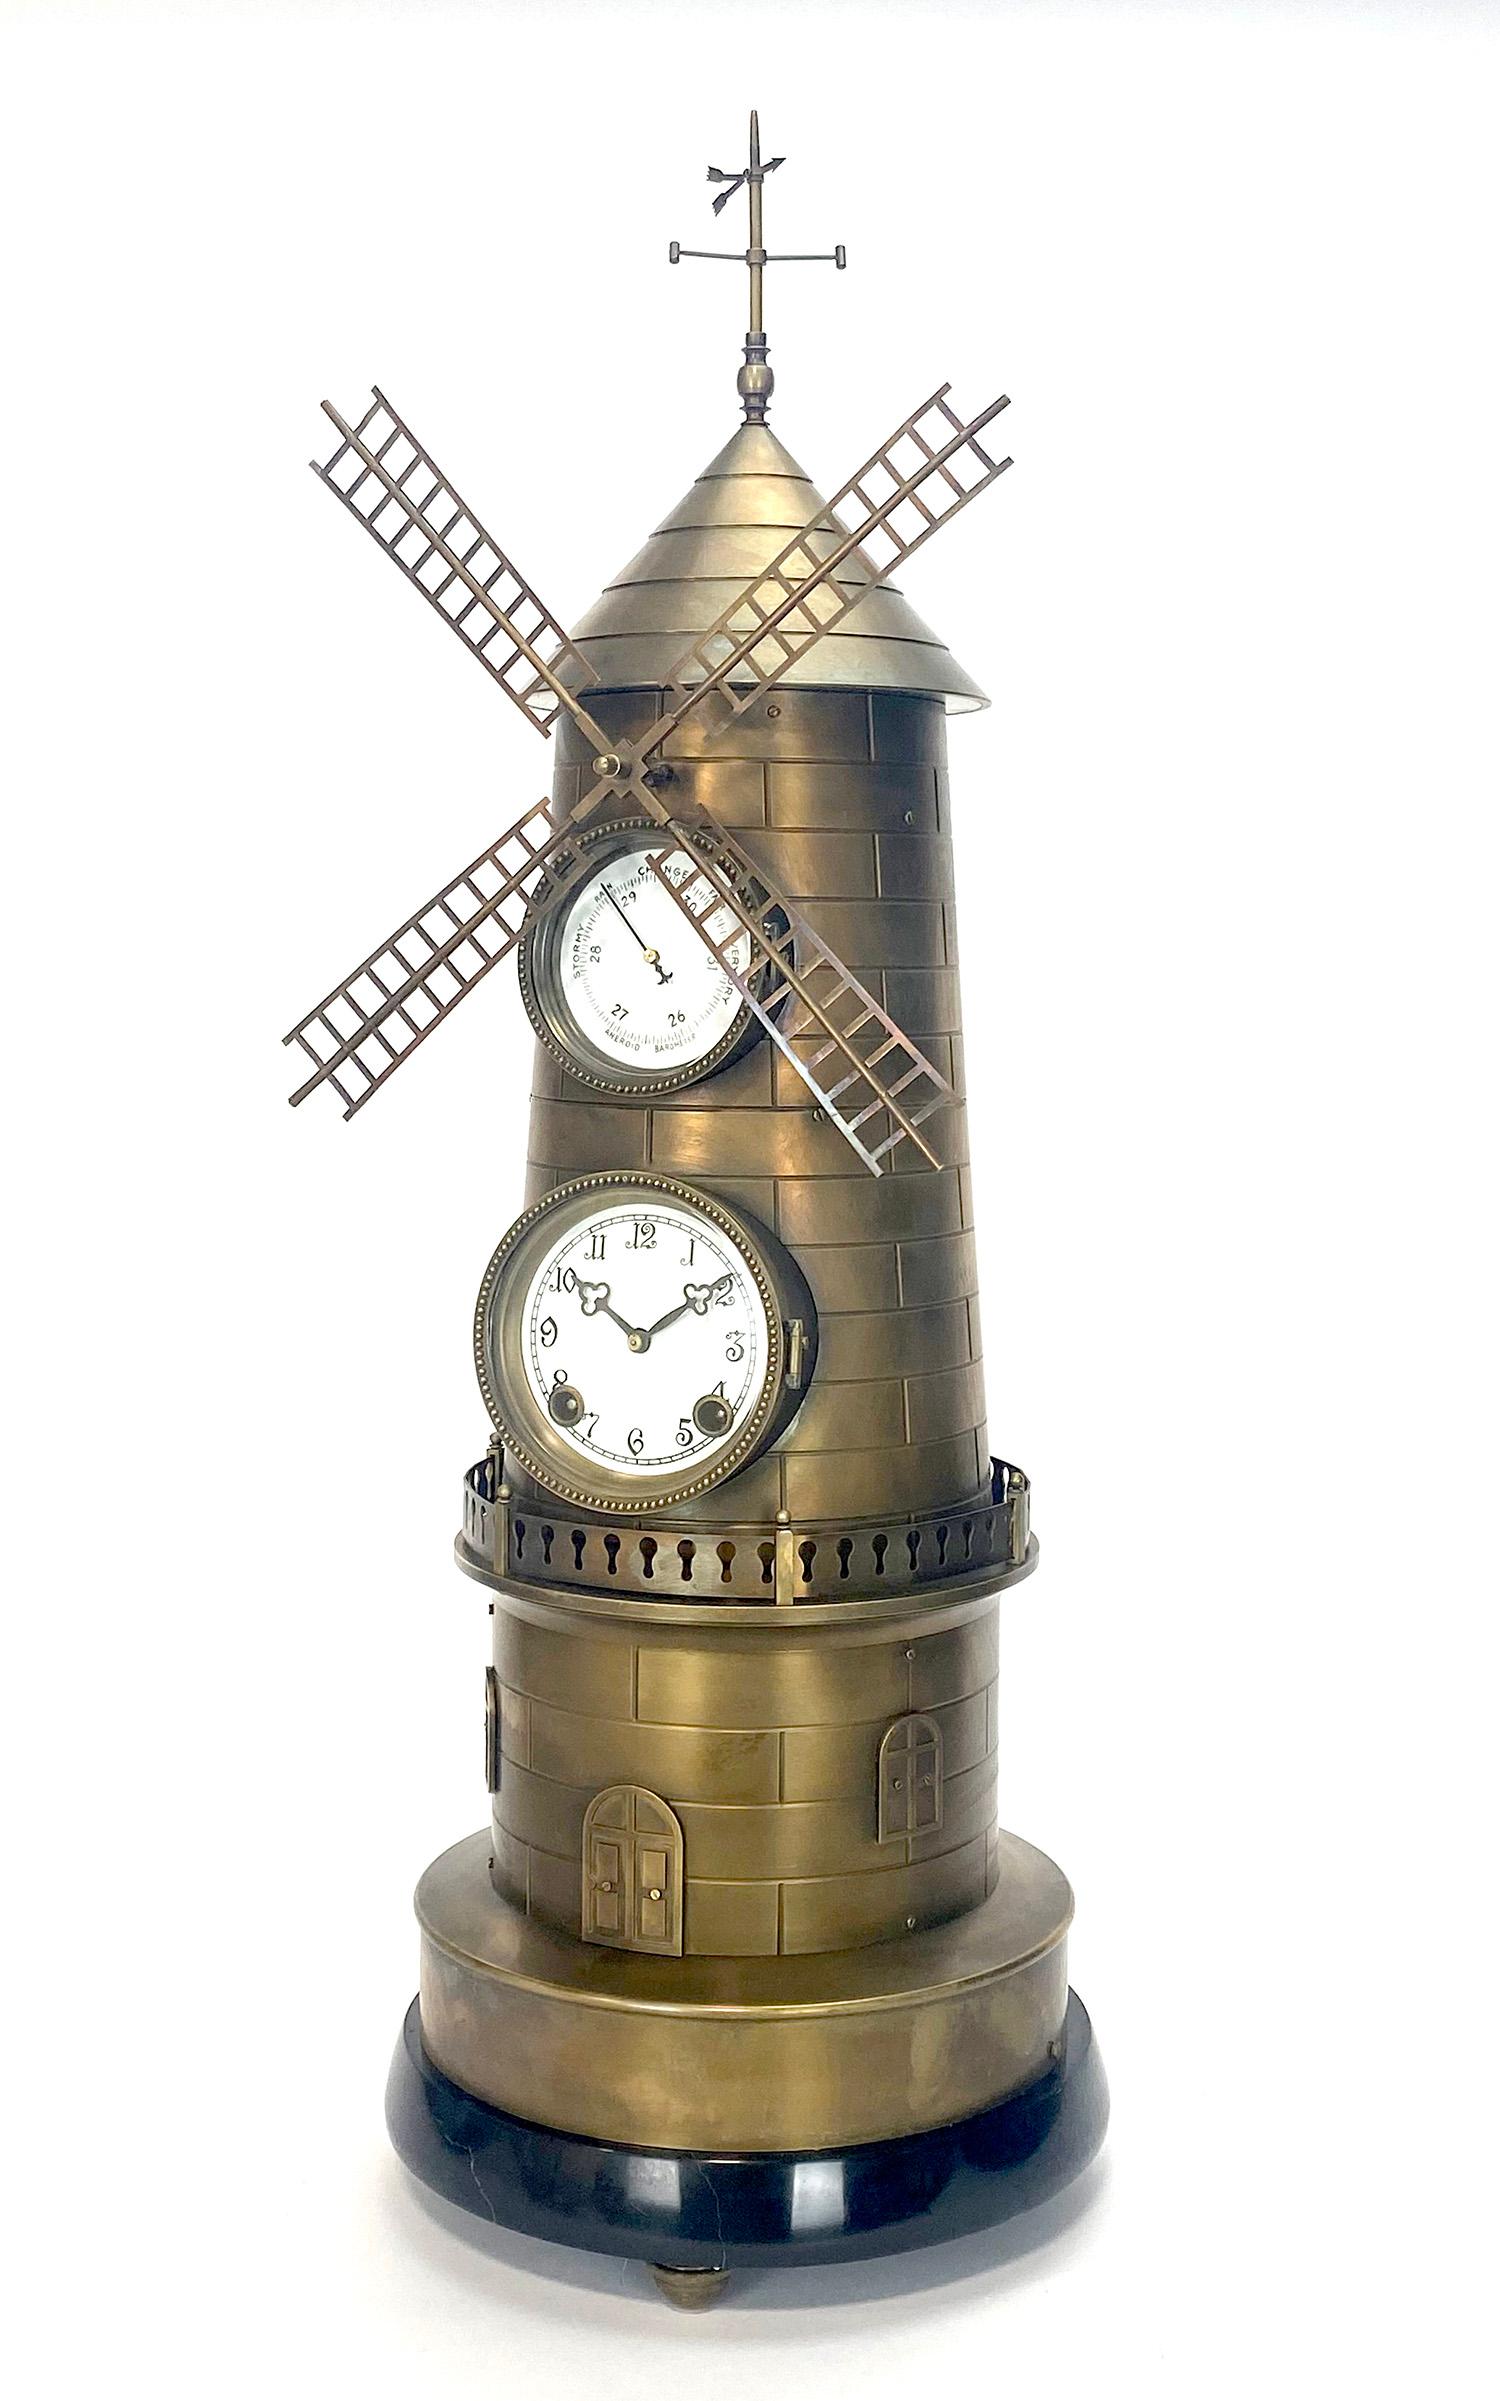 Large French style 8 day brass automaton windmill industrial clock w marble base.

Here we have a wonderful example of the industrial series popular in French horology. While the clock is striking, the windmill spins around, which really puts life